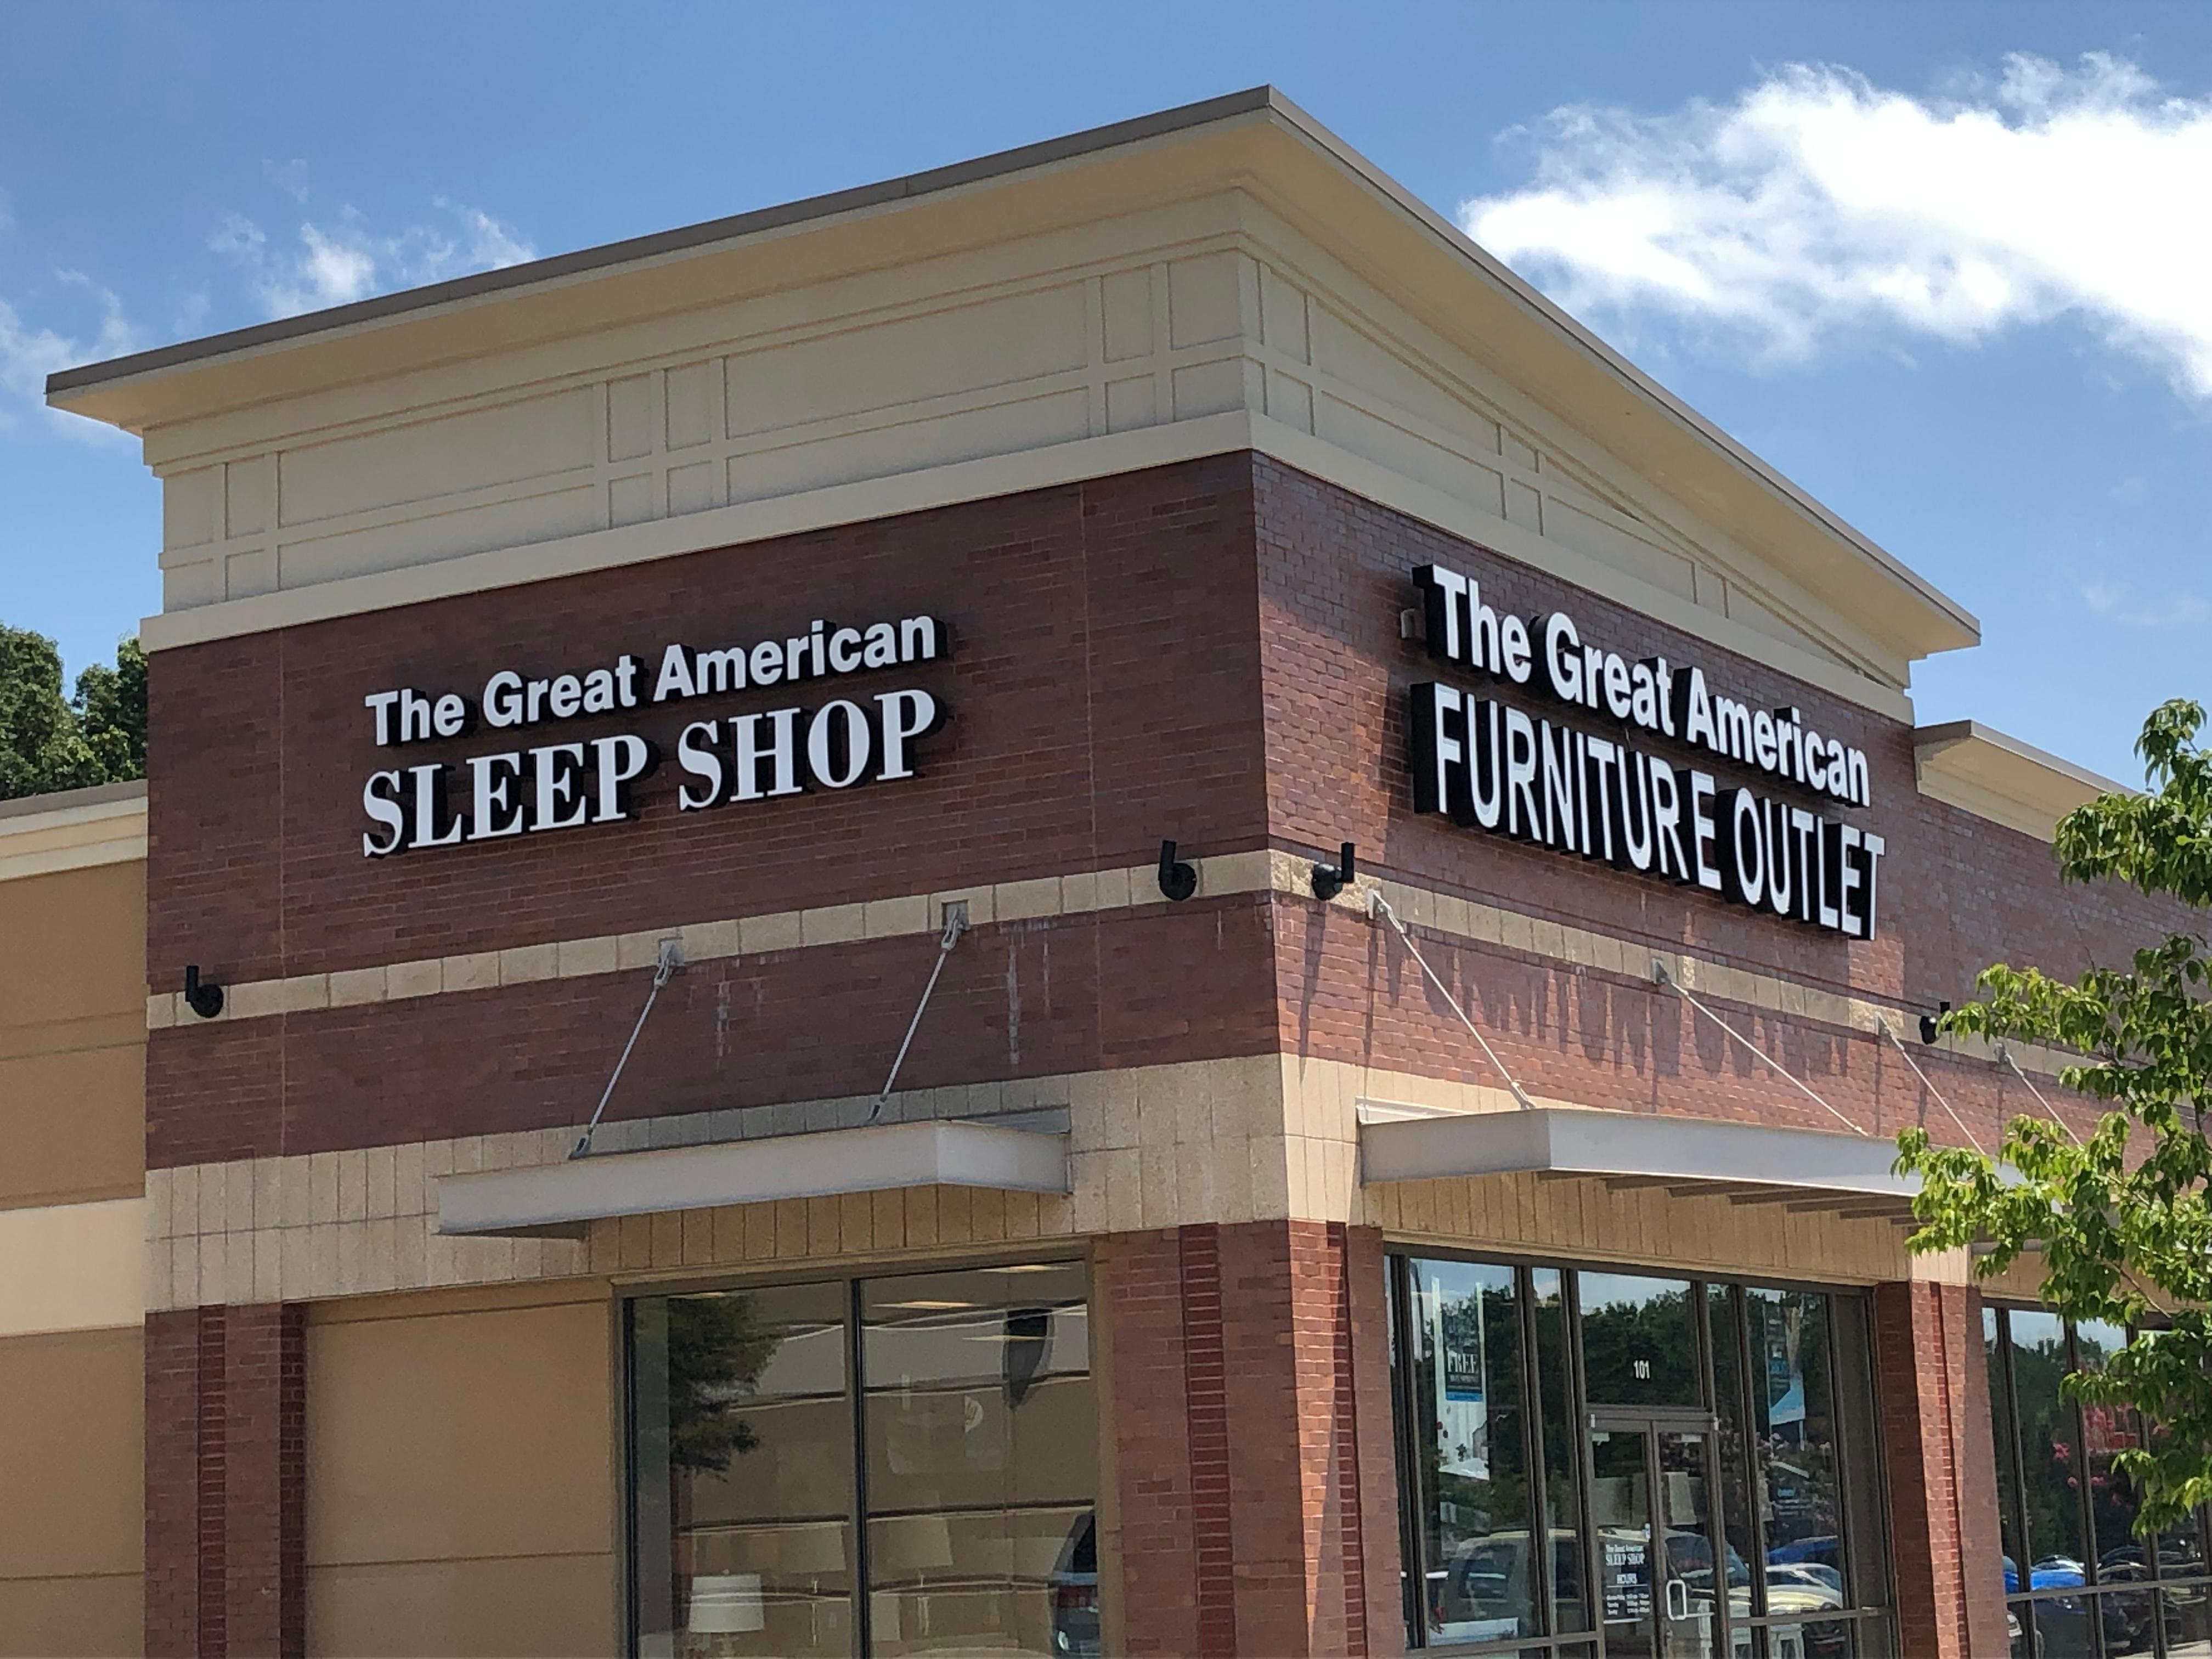 The Great American Furniture Outlet and Sleep Shop Photo